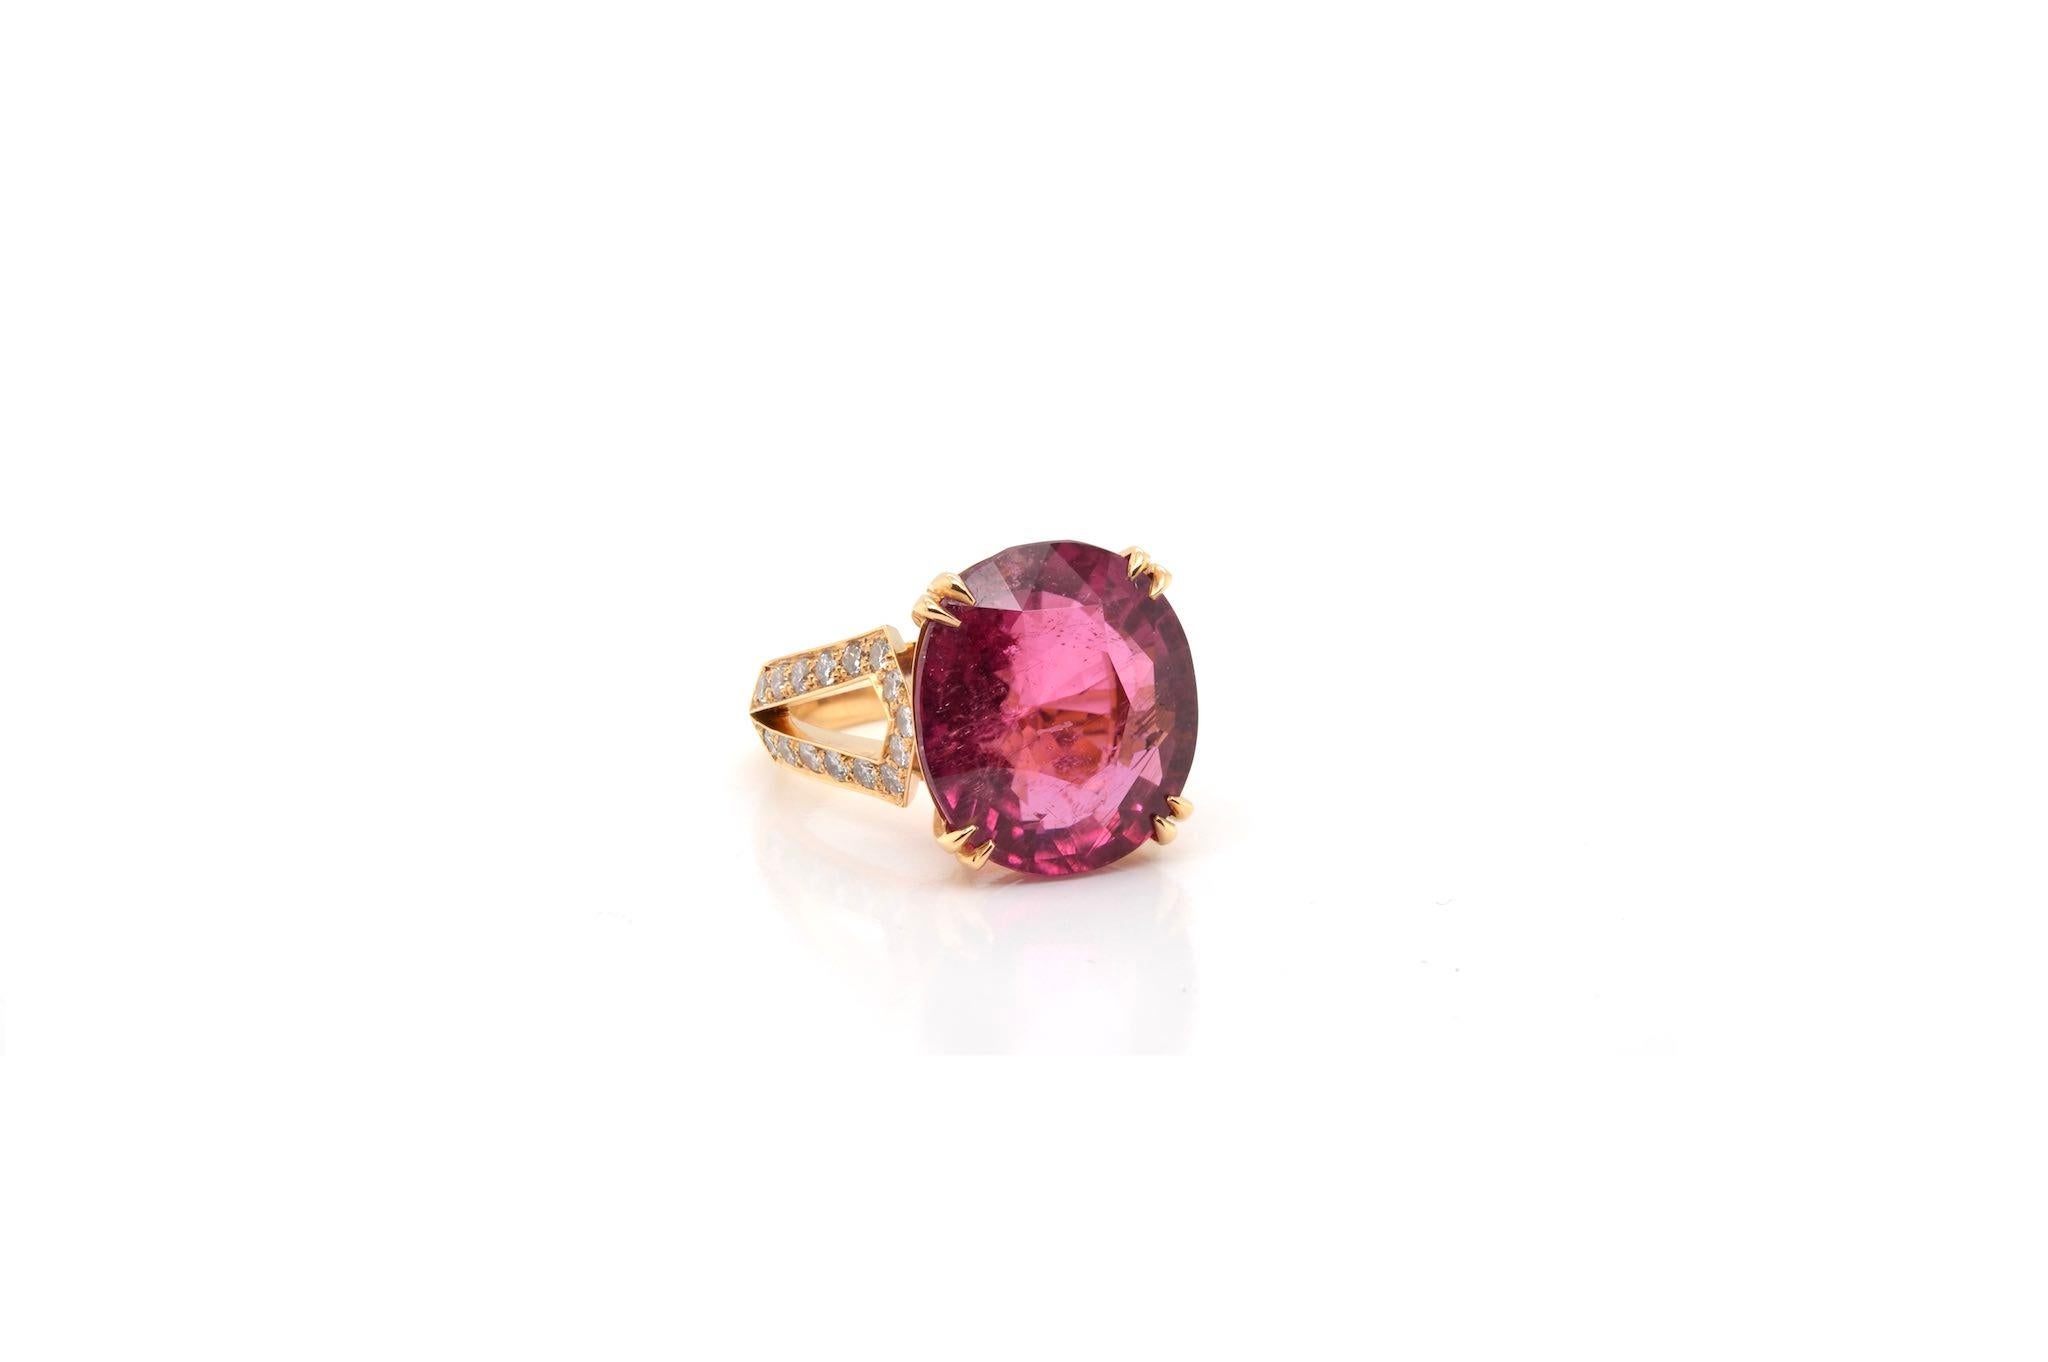 Round Cut 14.10 carats Rubellite tourmaline ring with brilliant cut diamonds For Sale